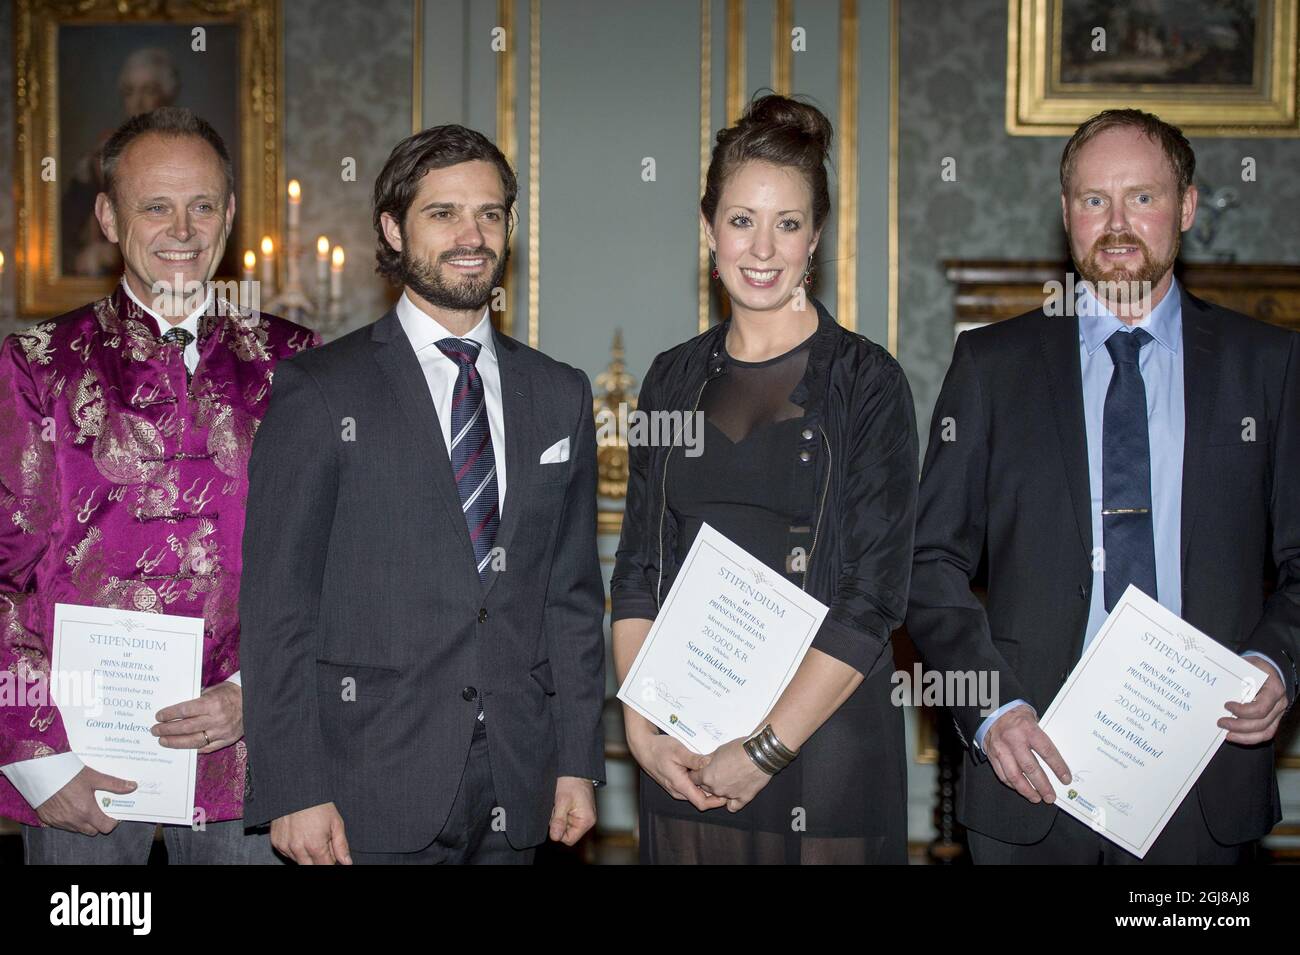 biologisch Atletisch hond STOCKHOLM 20140114 Prince Carl Philip awards Scholarships from the Prince  Bertil and Princess Lilian Sports Foundation at the Royal Palace of  Stockholm. The Foundation's purpose is to promote sports through  scholarships for